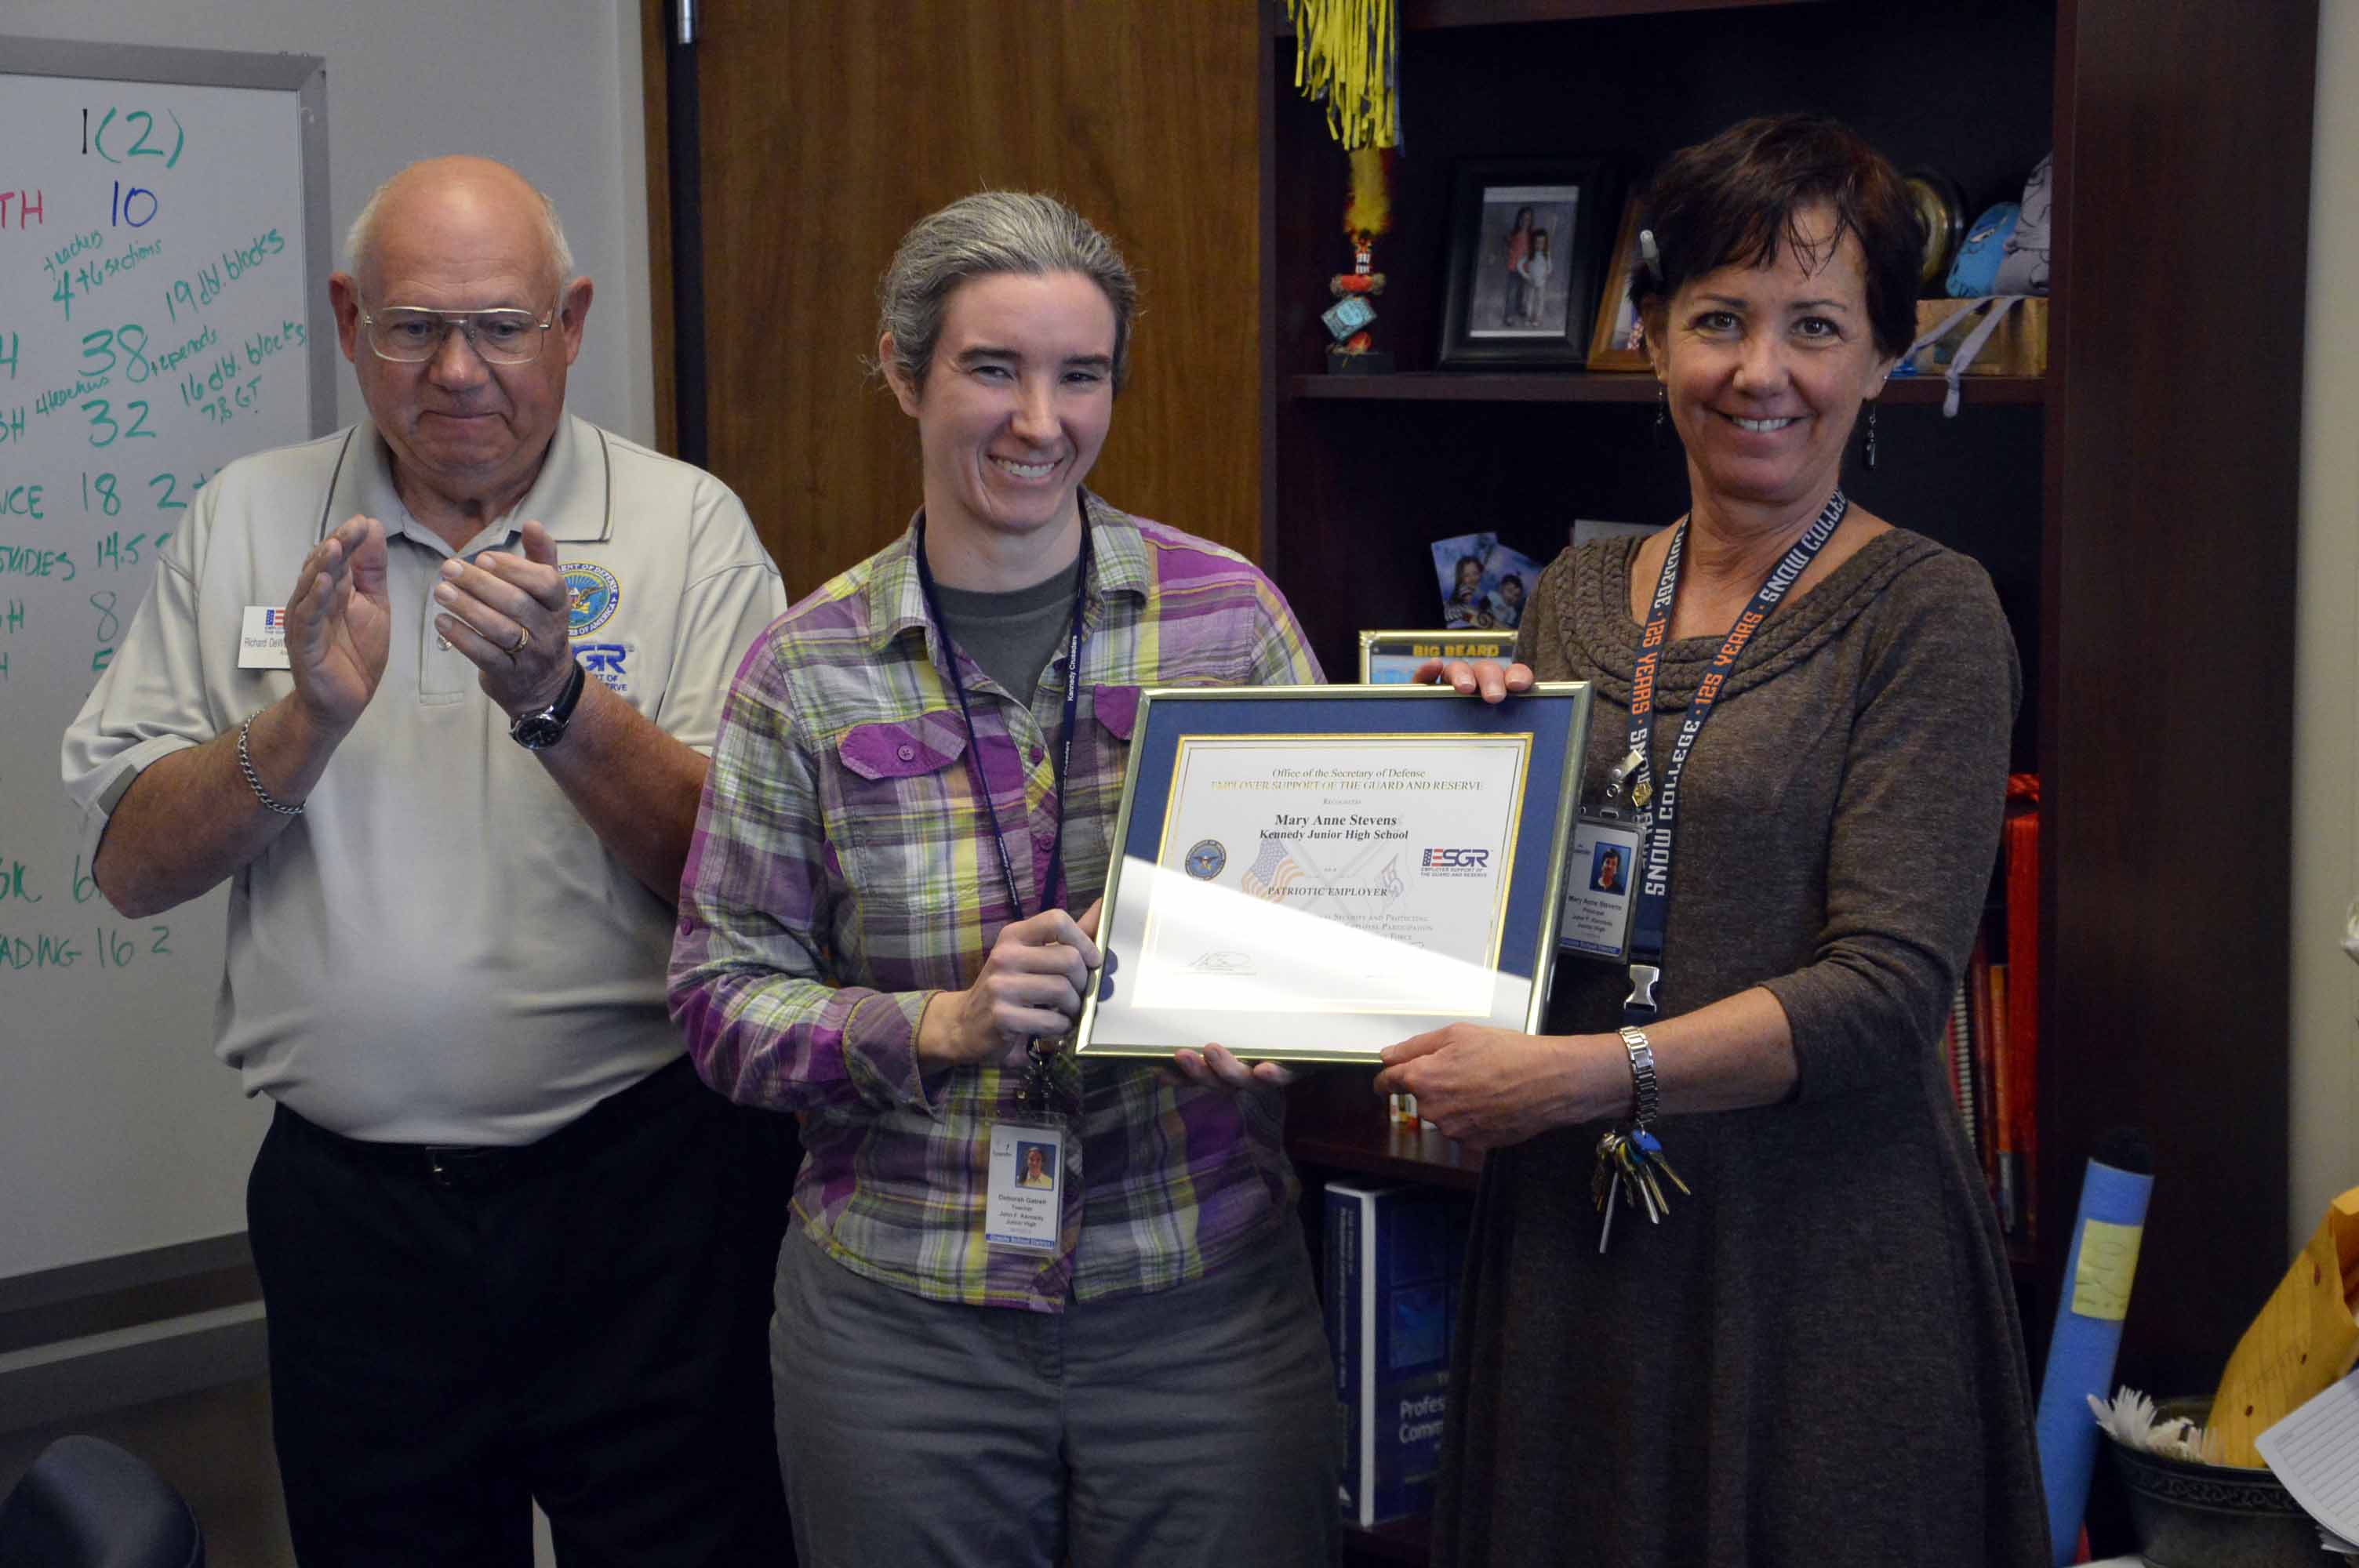 Kennedy Jr. High principal receives Patriot Award for supporting teacher